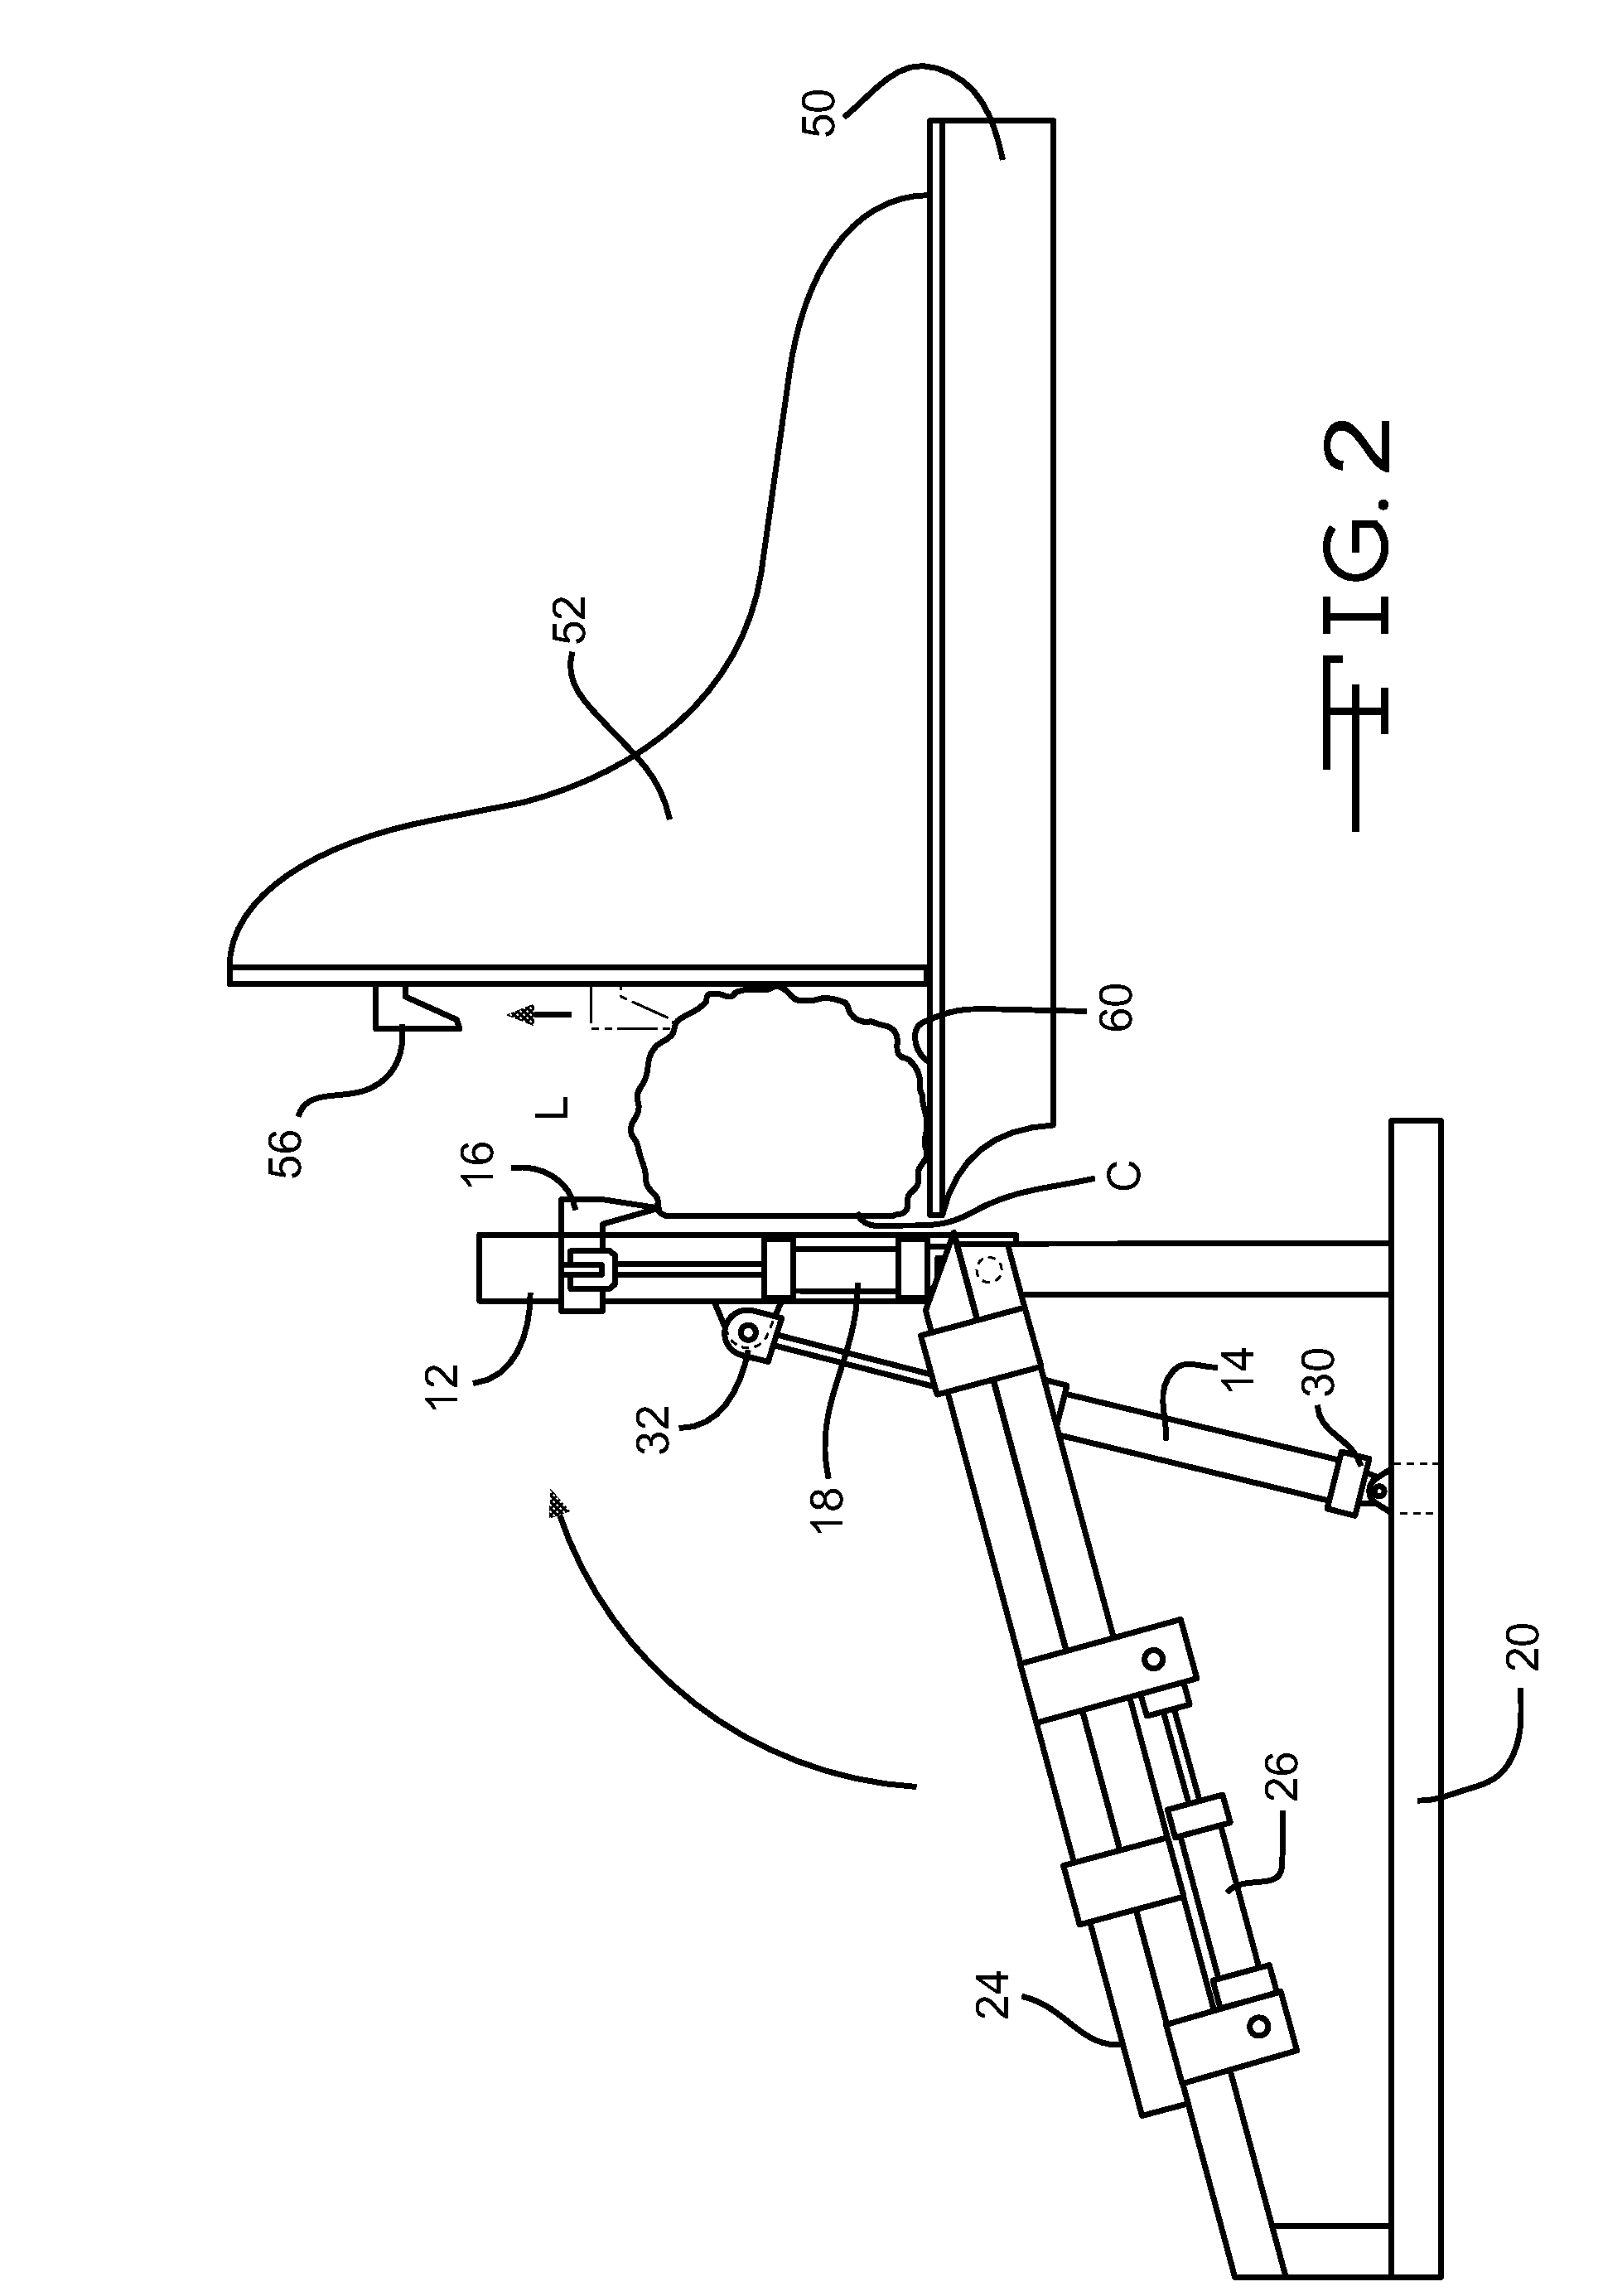 Method and Apparatus for Turning a Log for Processing in a Sawmill